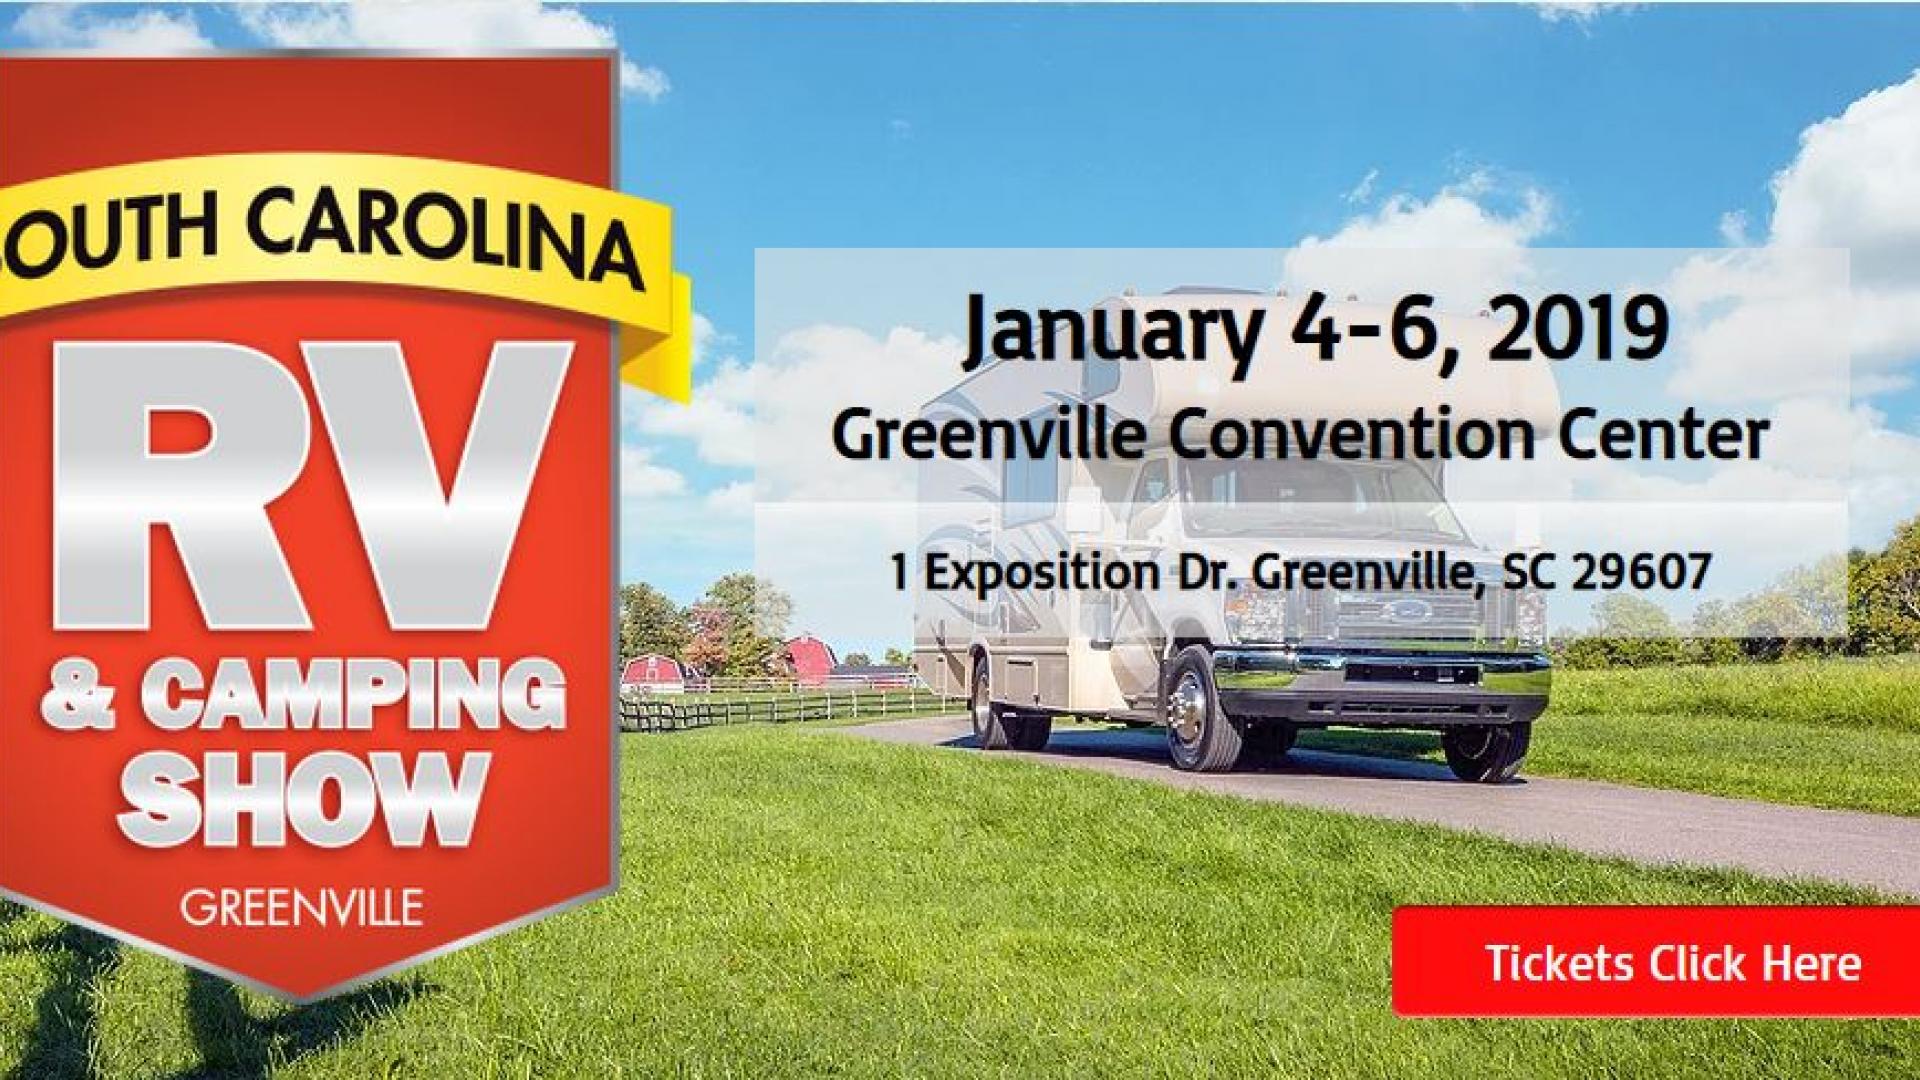 South Carolina RV & Camping Show GDRV4Life Your Connection to the